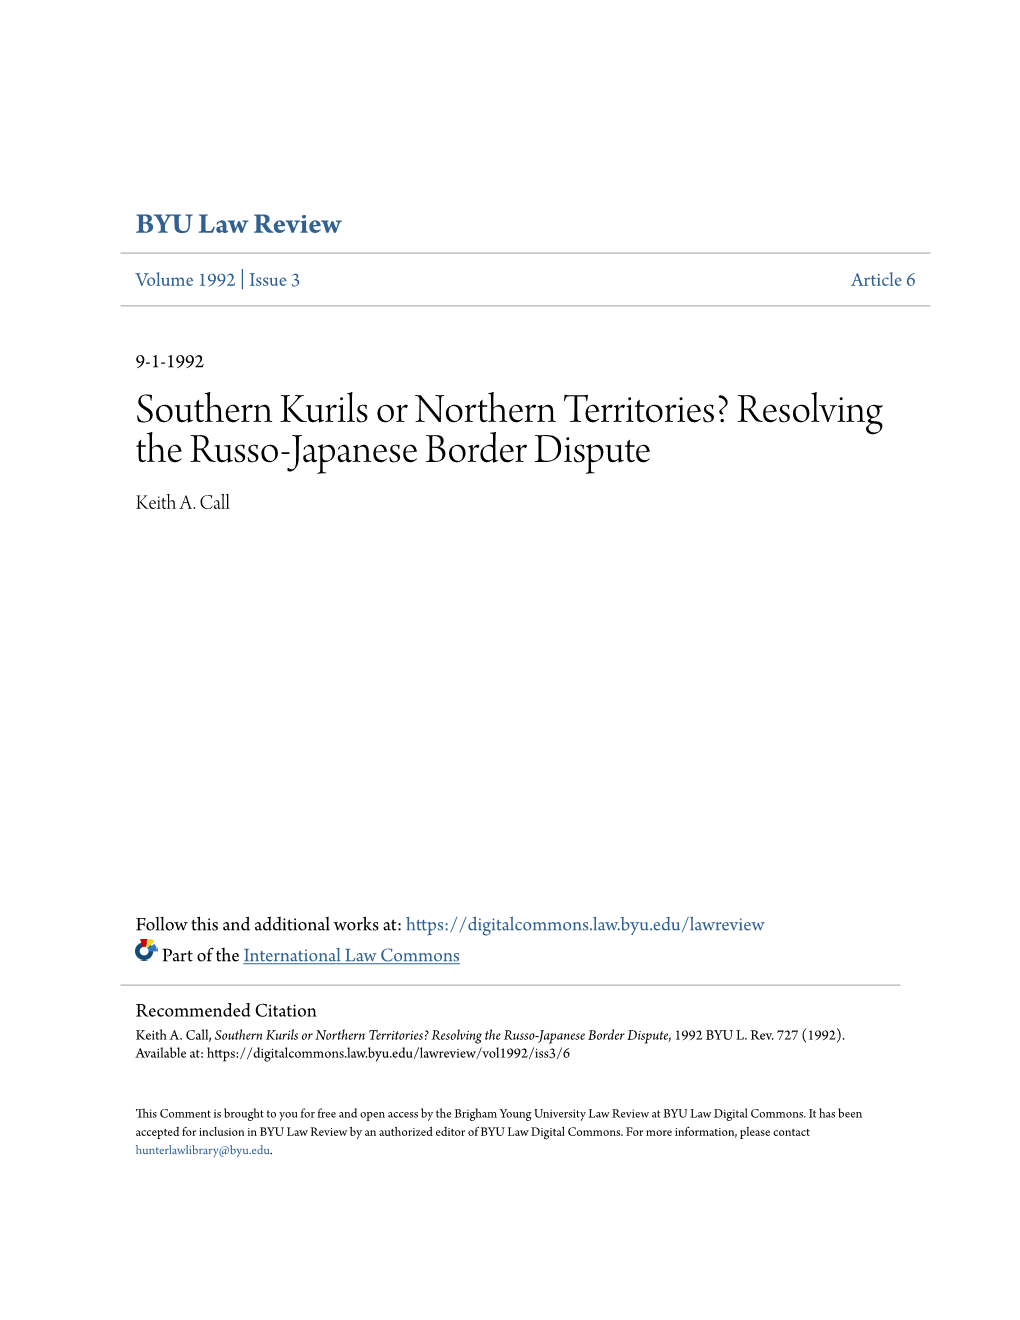 Southern Kurils Or Northern Territories? Resolving the Russo-Japanese Border Dispute Keith A